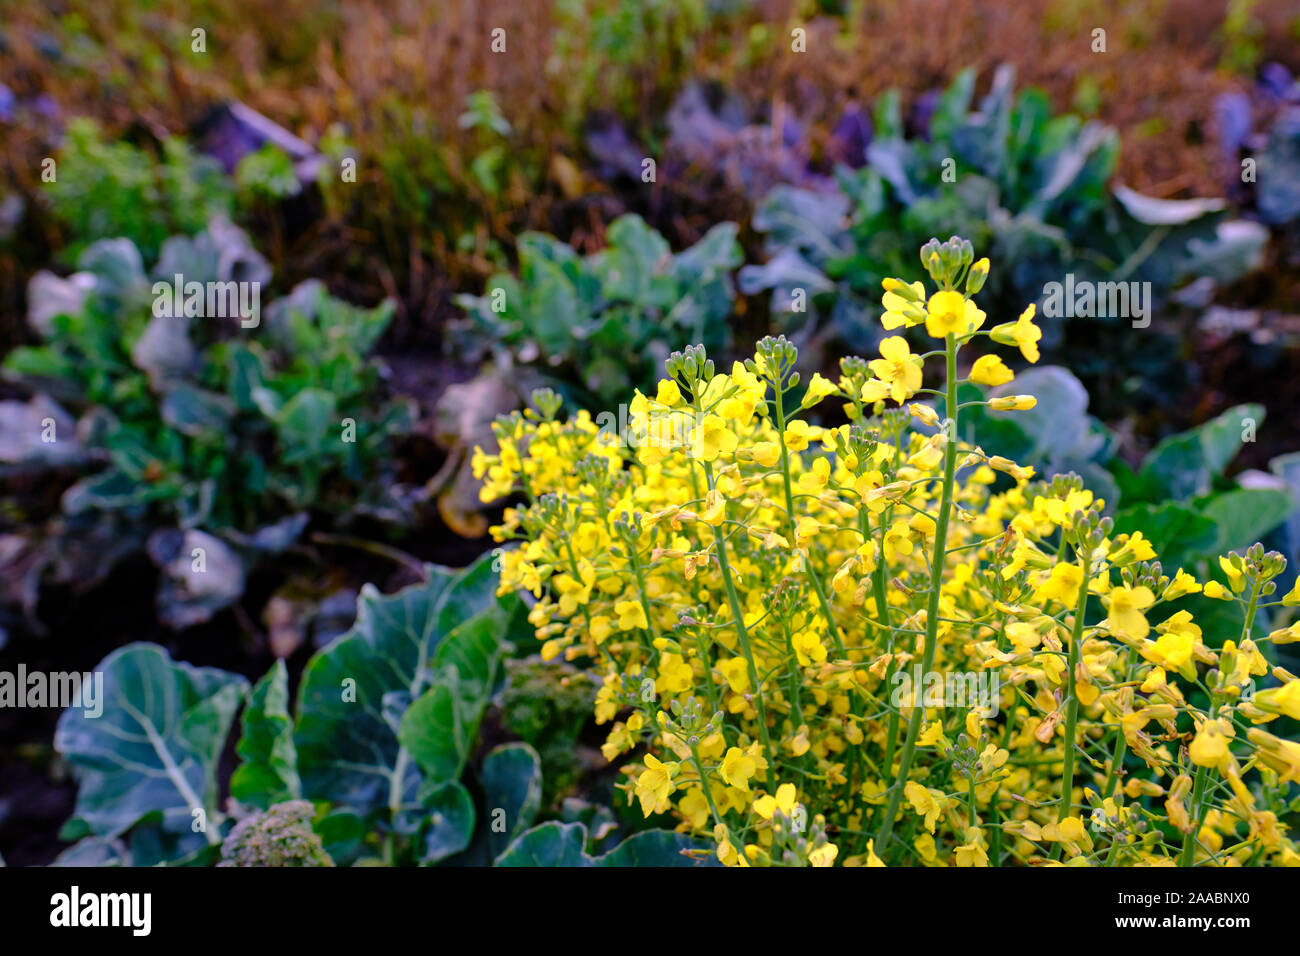 Rapeseed plant flowers in a non industrial, organic garden Stock Photo